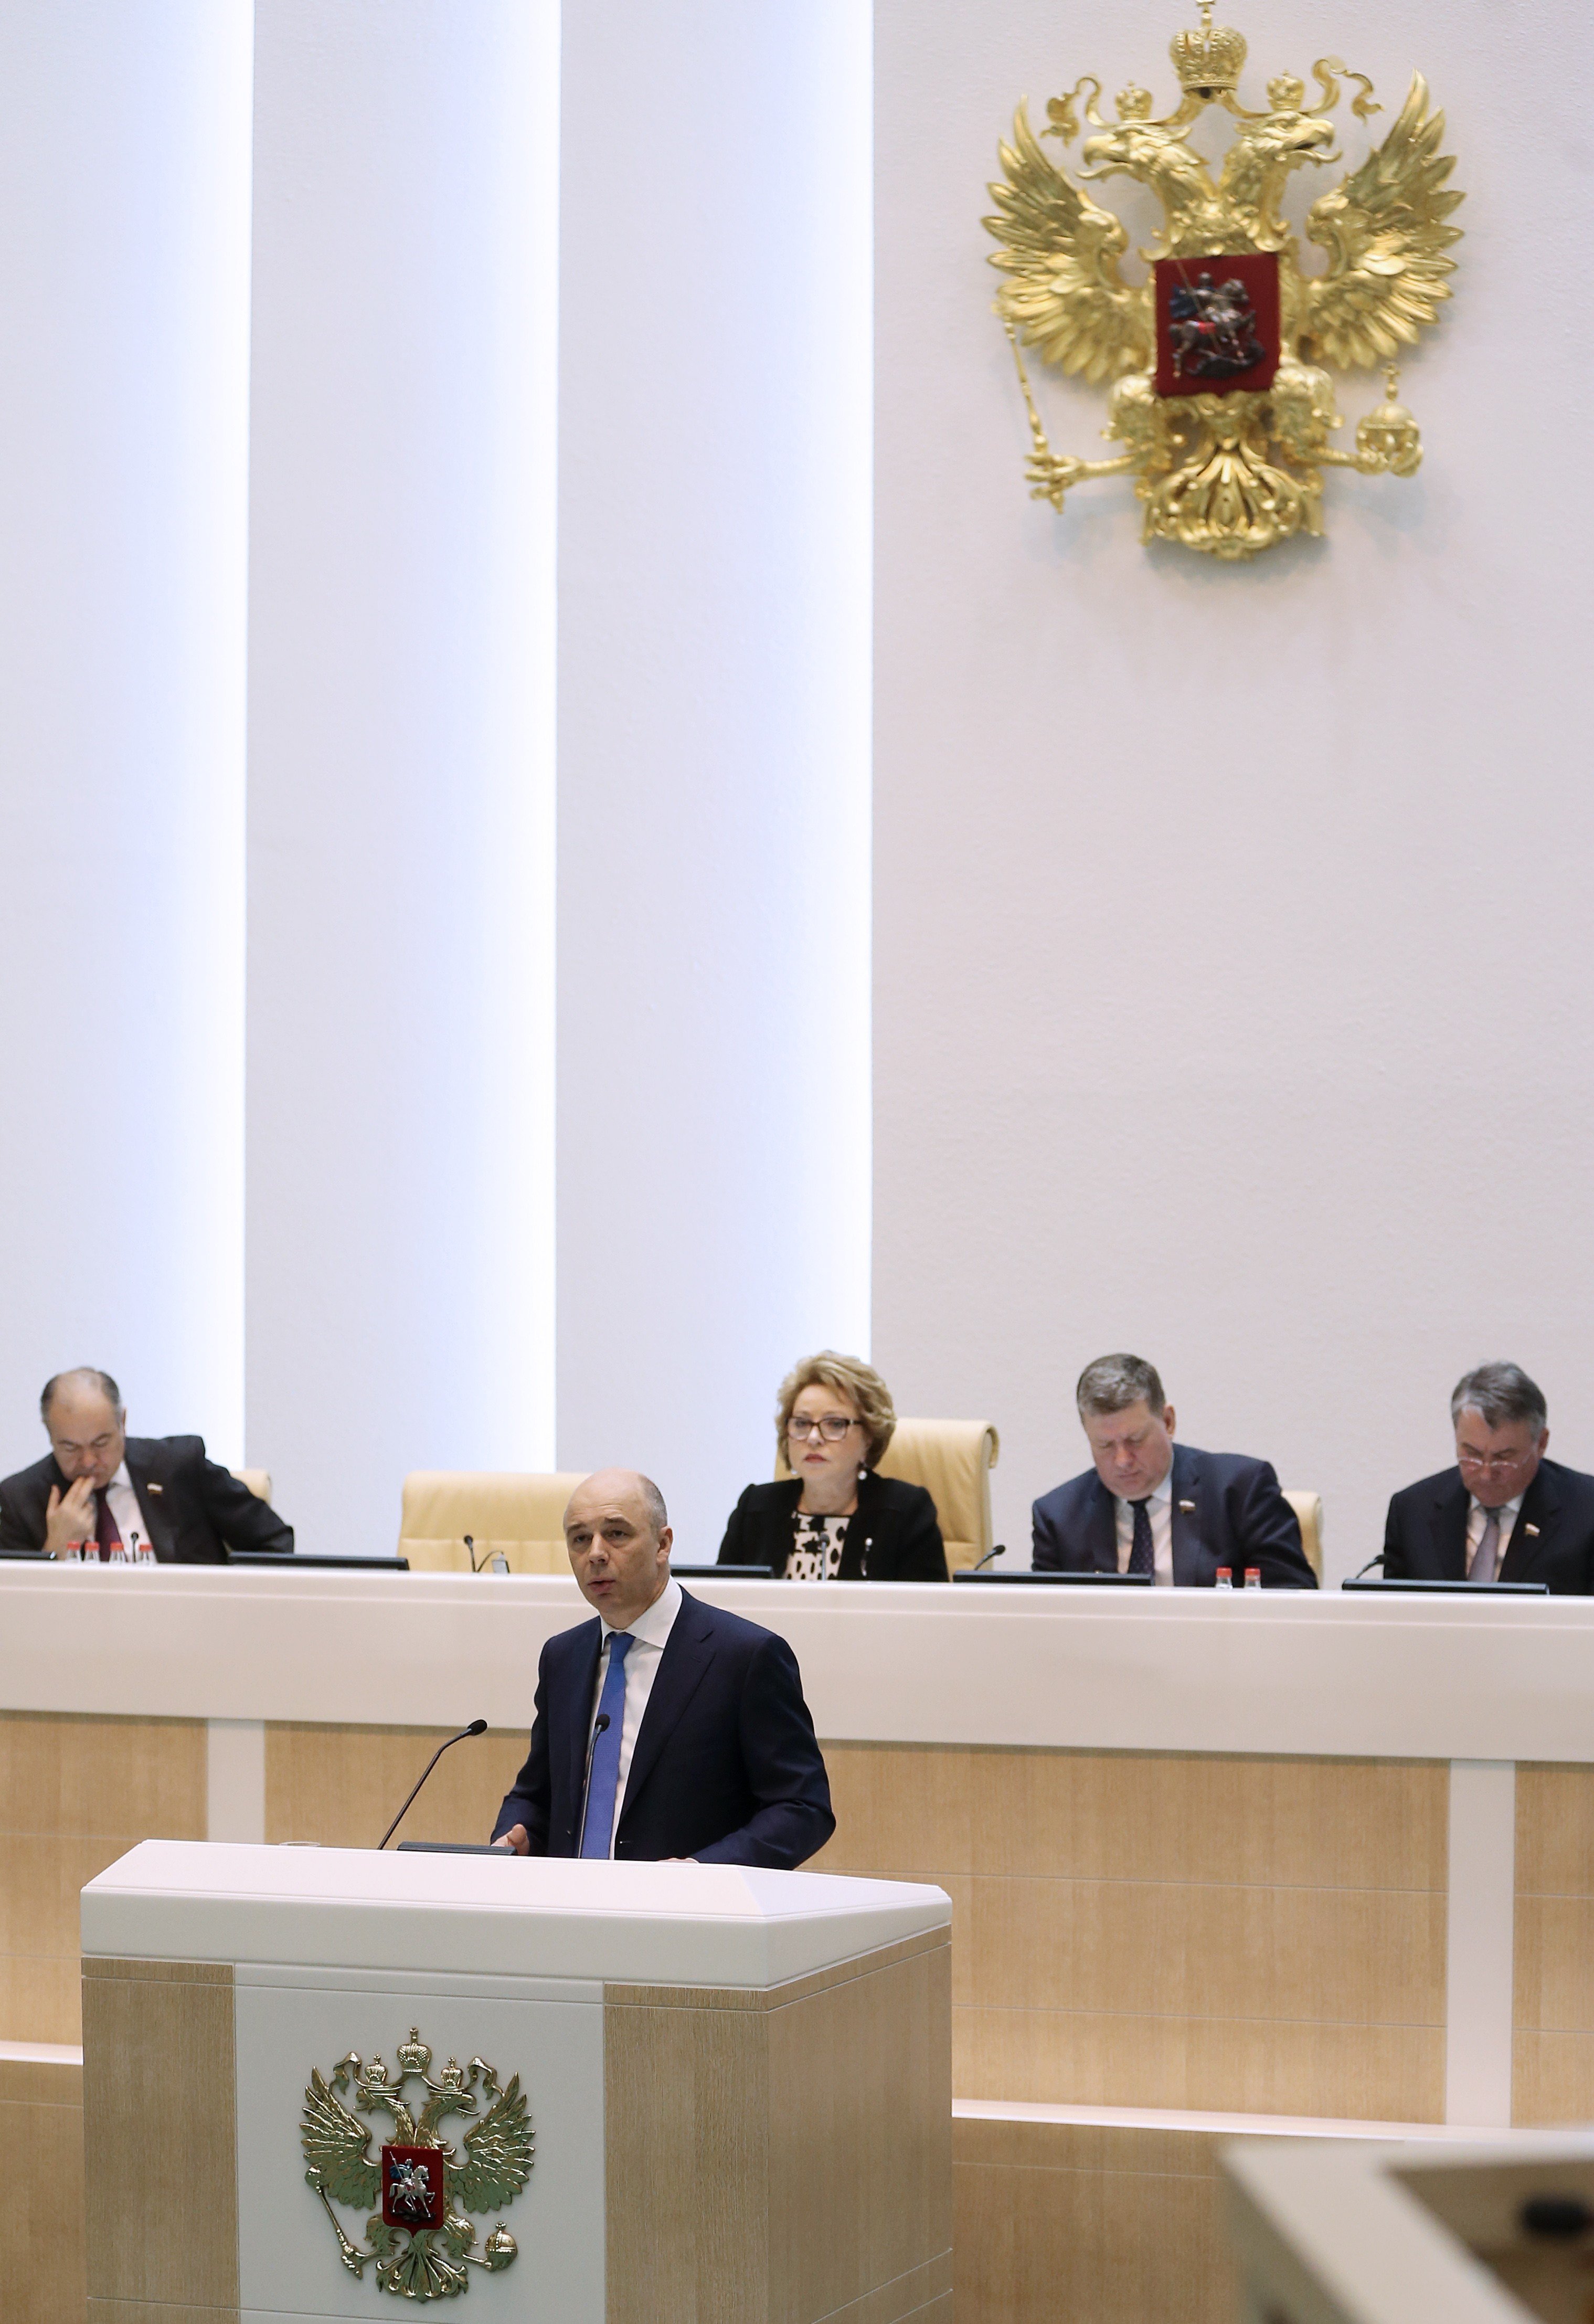 Russian Federation Council member Anton Siluanov delivers a speech as Russian Federation Council deputy chairman Ilyas Ukhmanov, Russian Federation Council chairperson Valentina Matviyenko, Russian Federation Council deputy chairmen Evgeny Bushmin and Yuri Vorobyov (L to R, background) look on at a plenary meeting of the Russian Federation Council on Jan. 28, 2015.